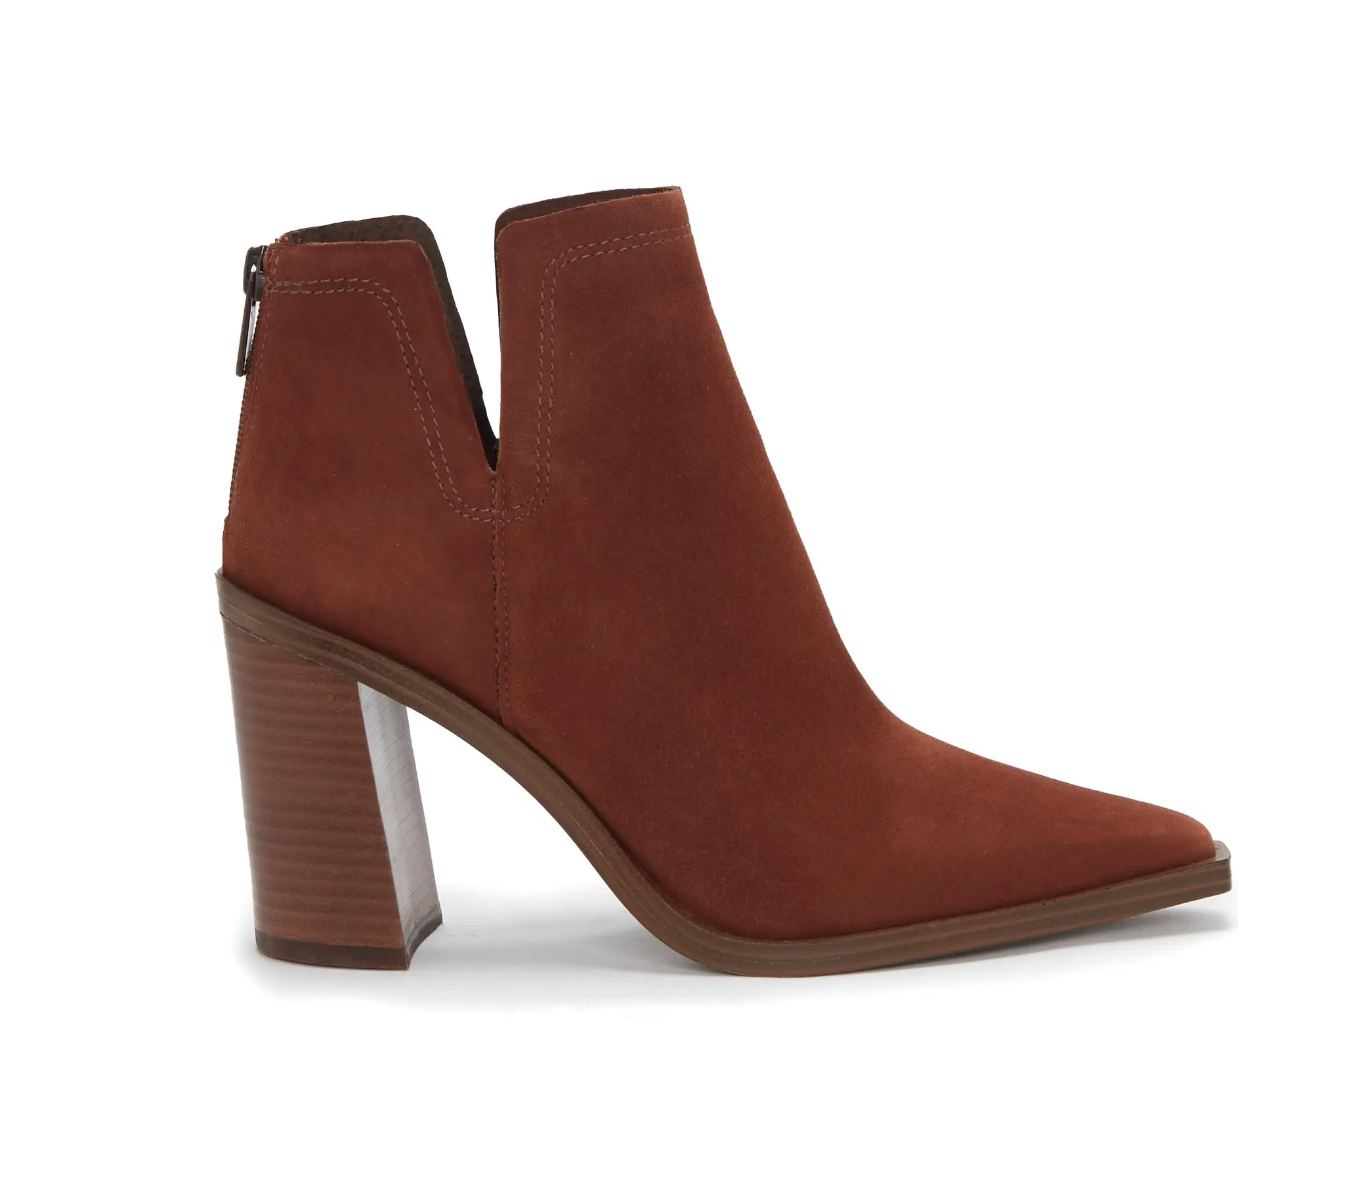 So Chic! We Want These 60%-Off Vince Camuto Booties in Every Color thumbnail